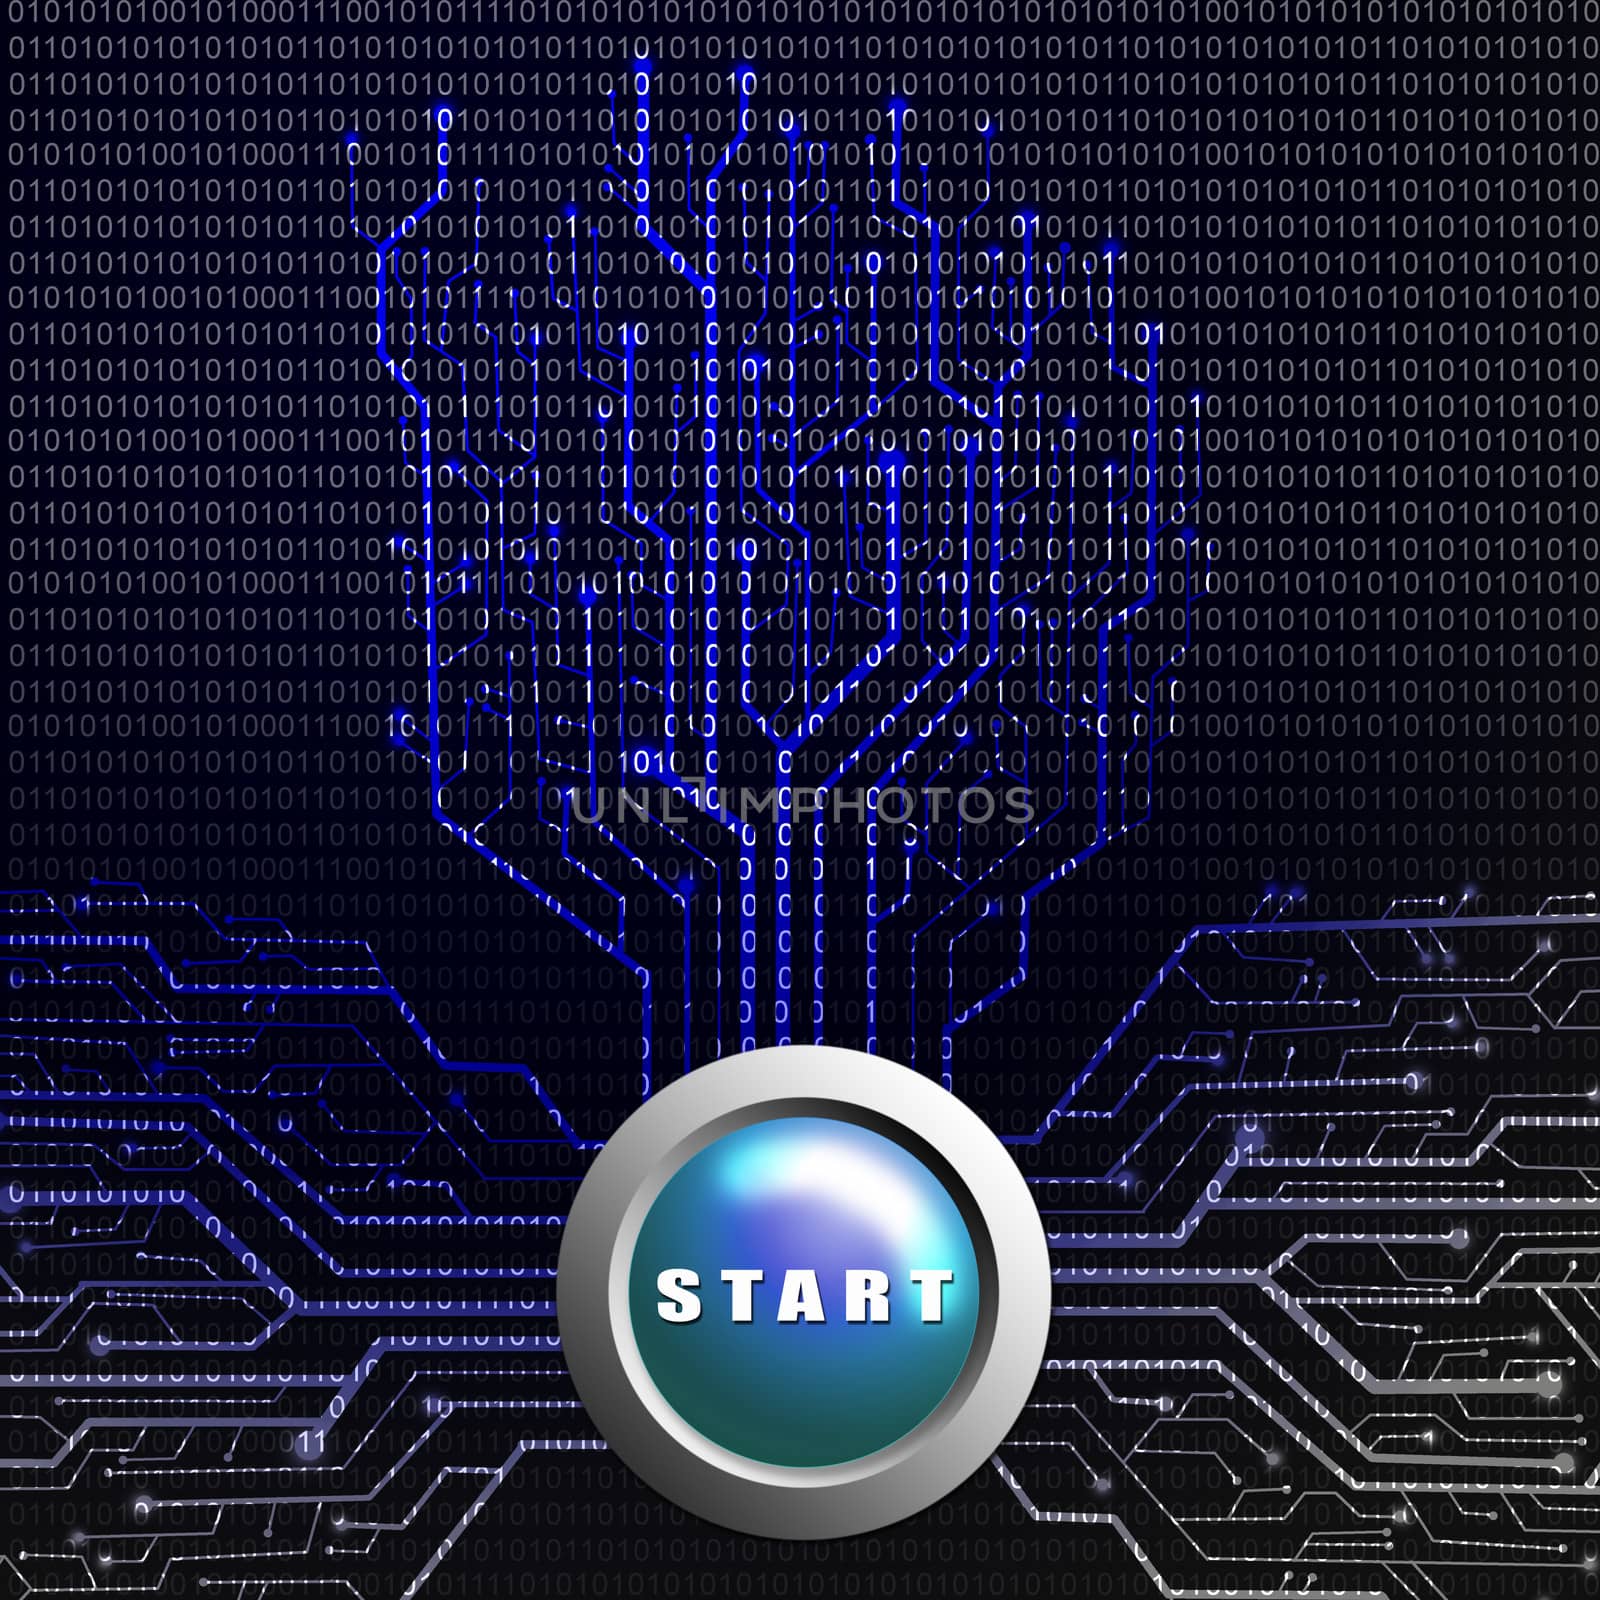 Start button on circuit board in Tree shape, Technology background by pixbox77